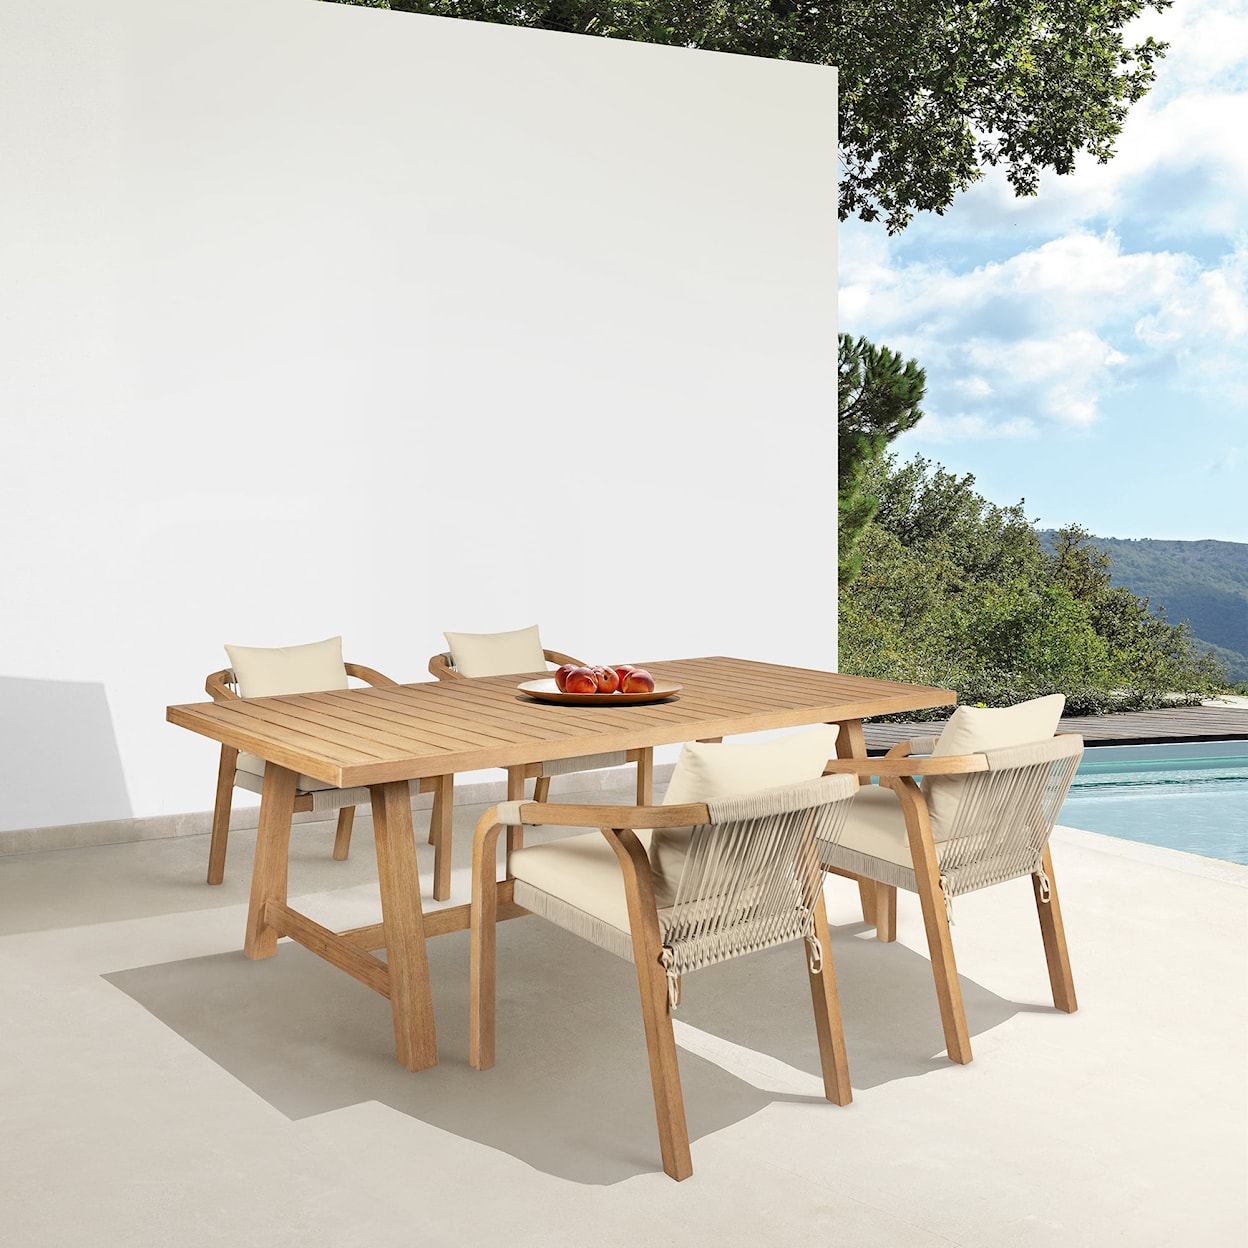 Armen Living Cypress Outdoor Dining Table